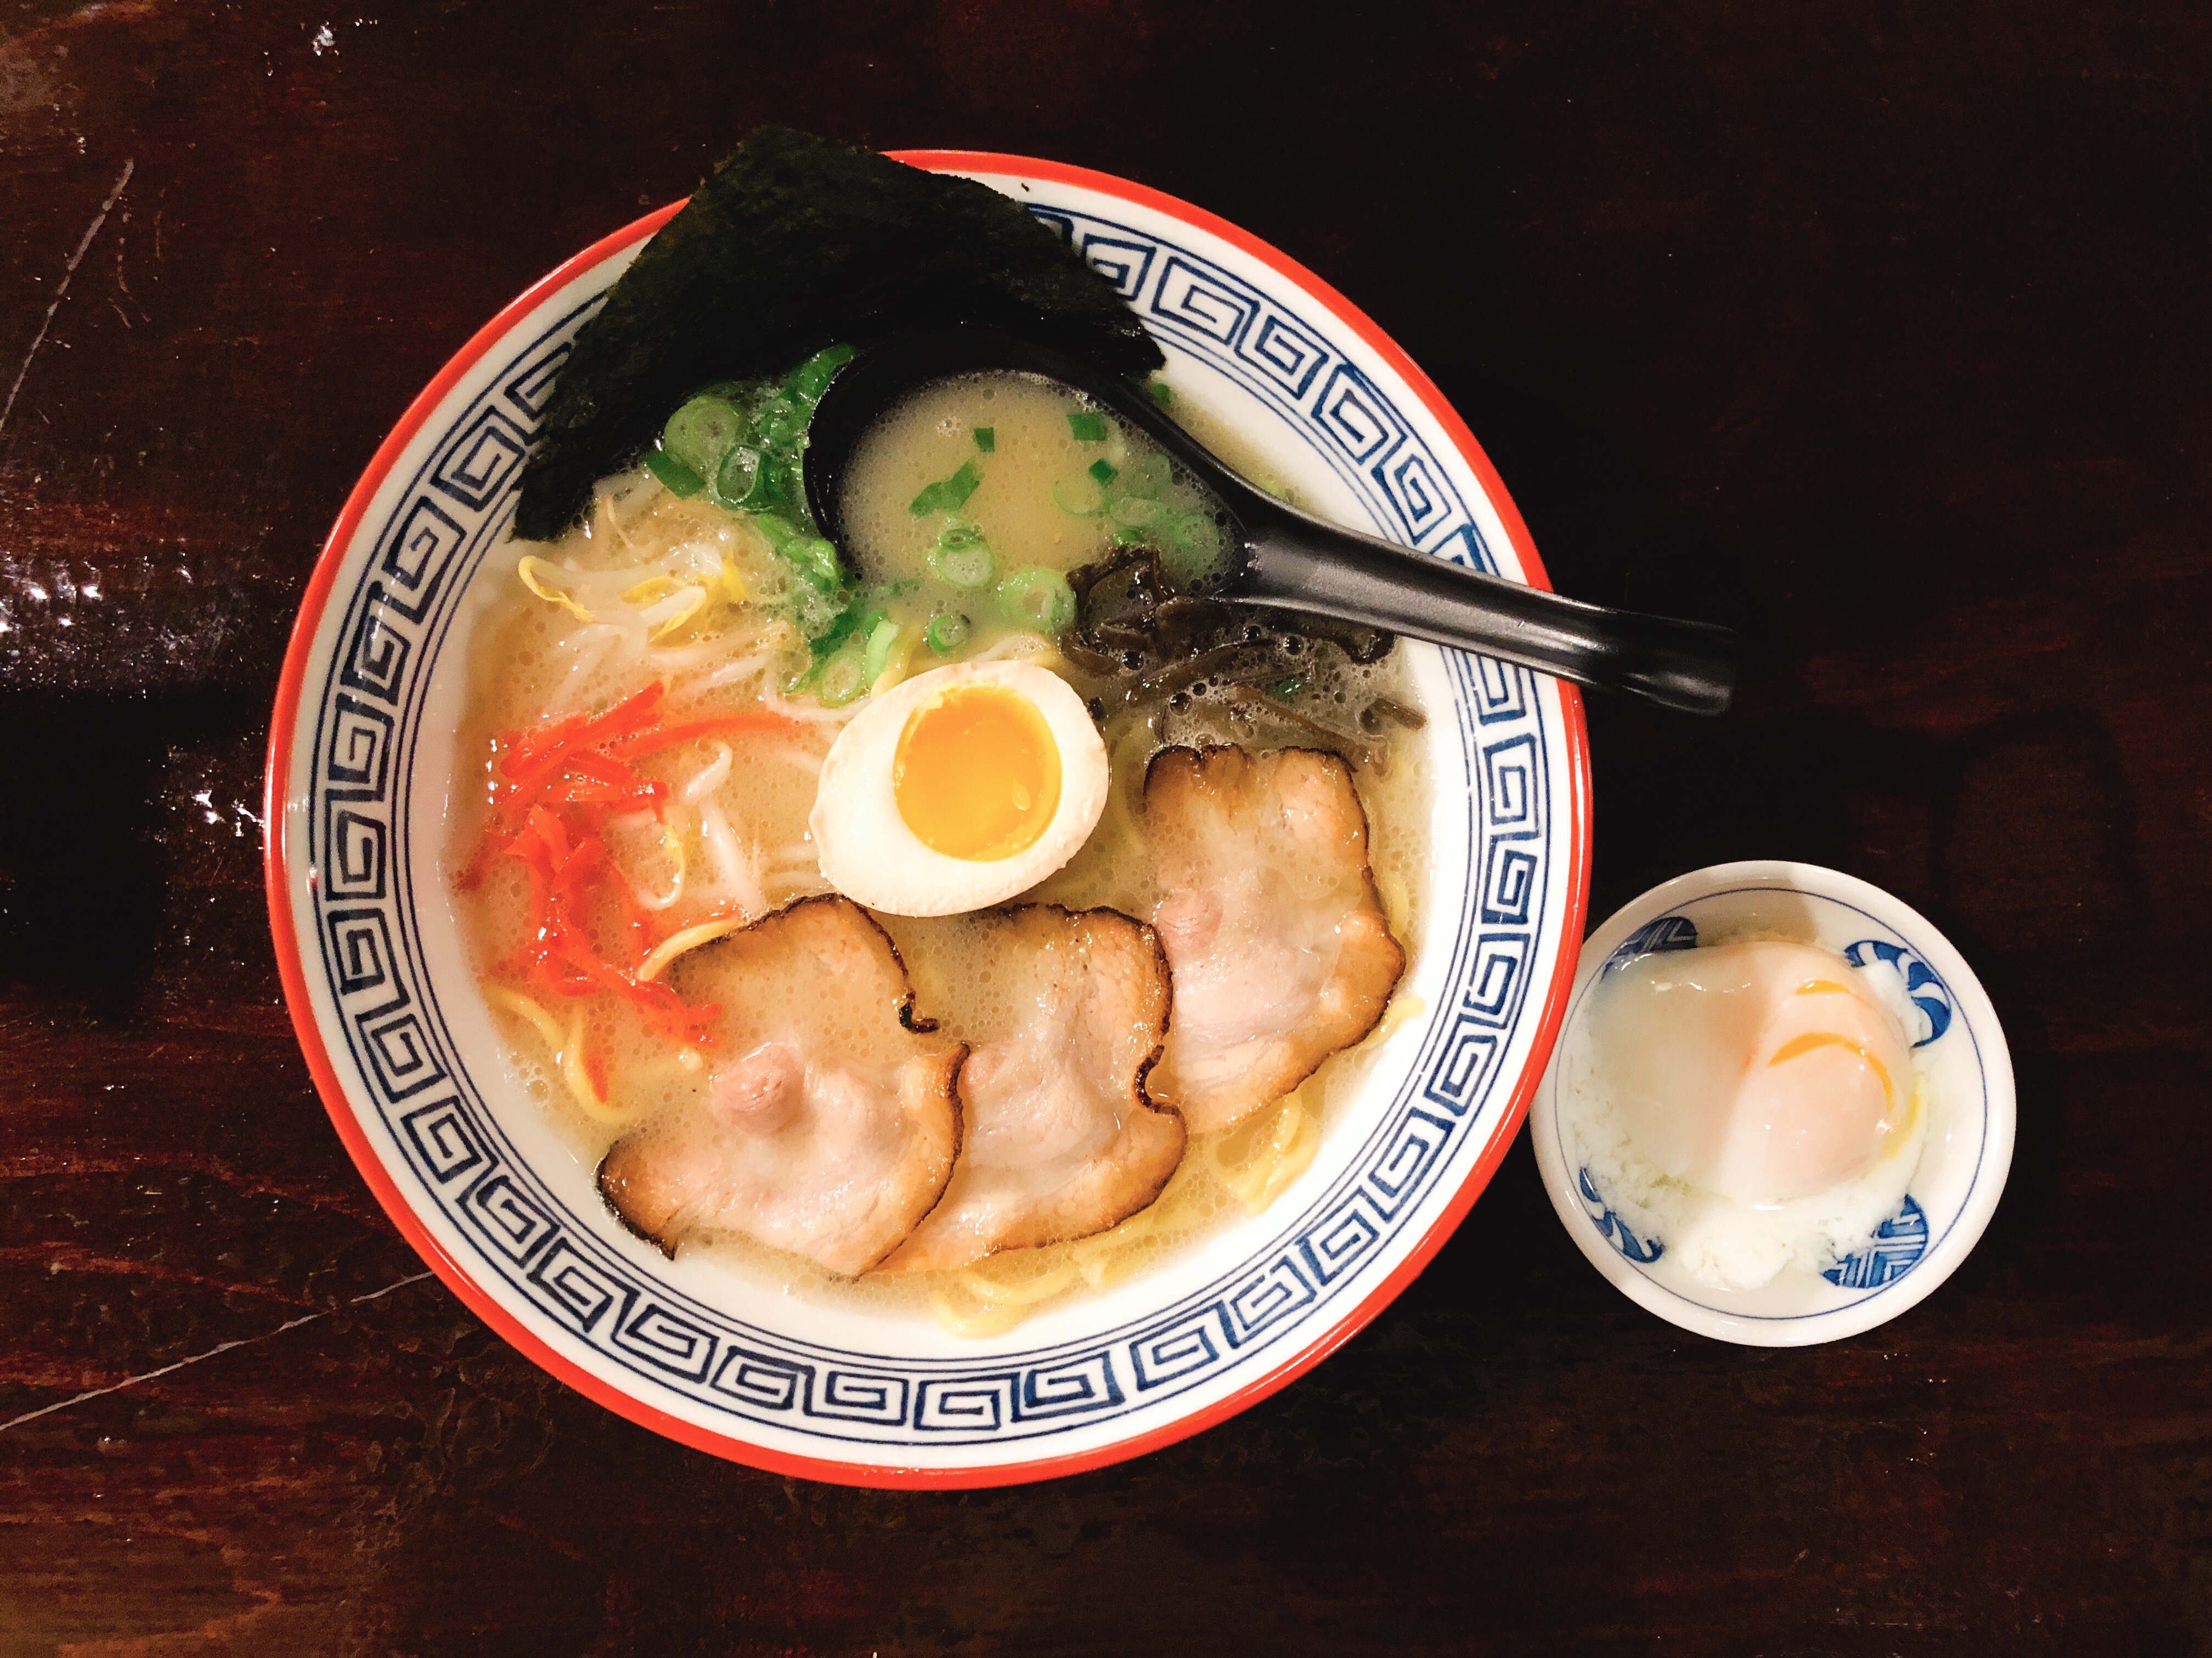 A bowl of ramen with a black spoon, slices of meat, chopped vegetables, and a soft egg.